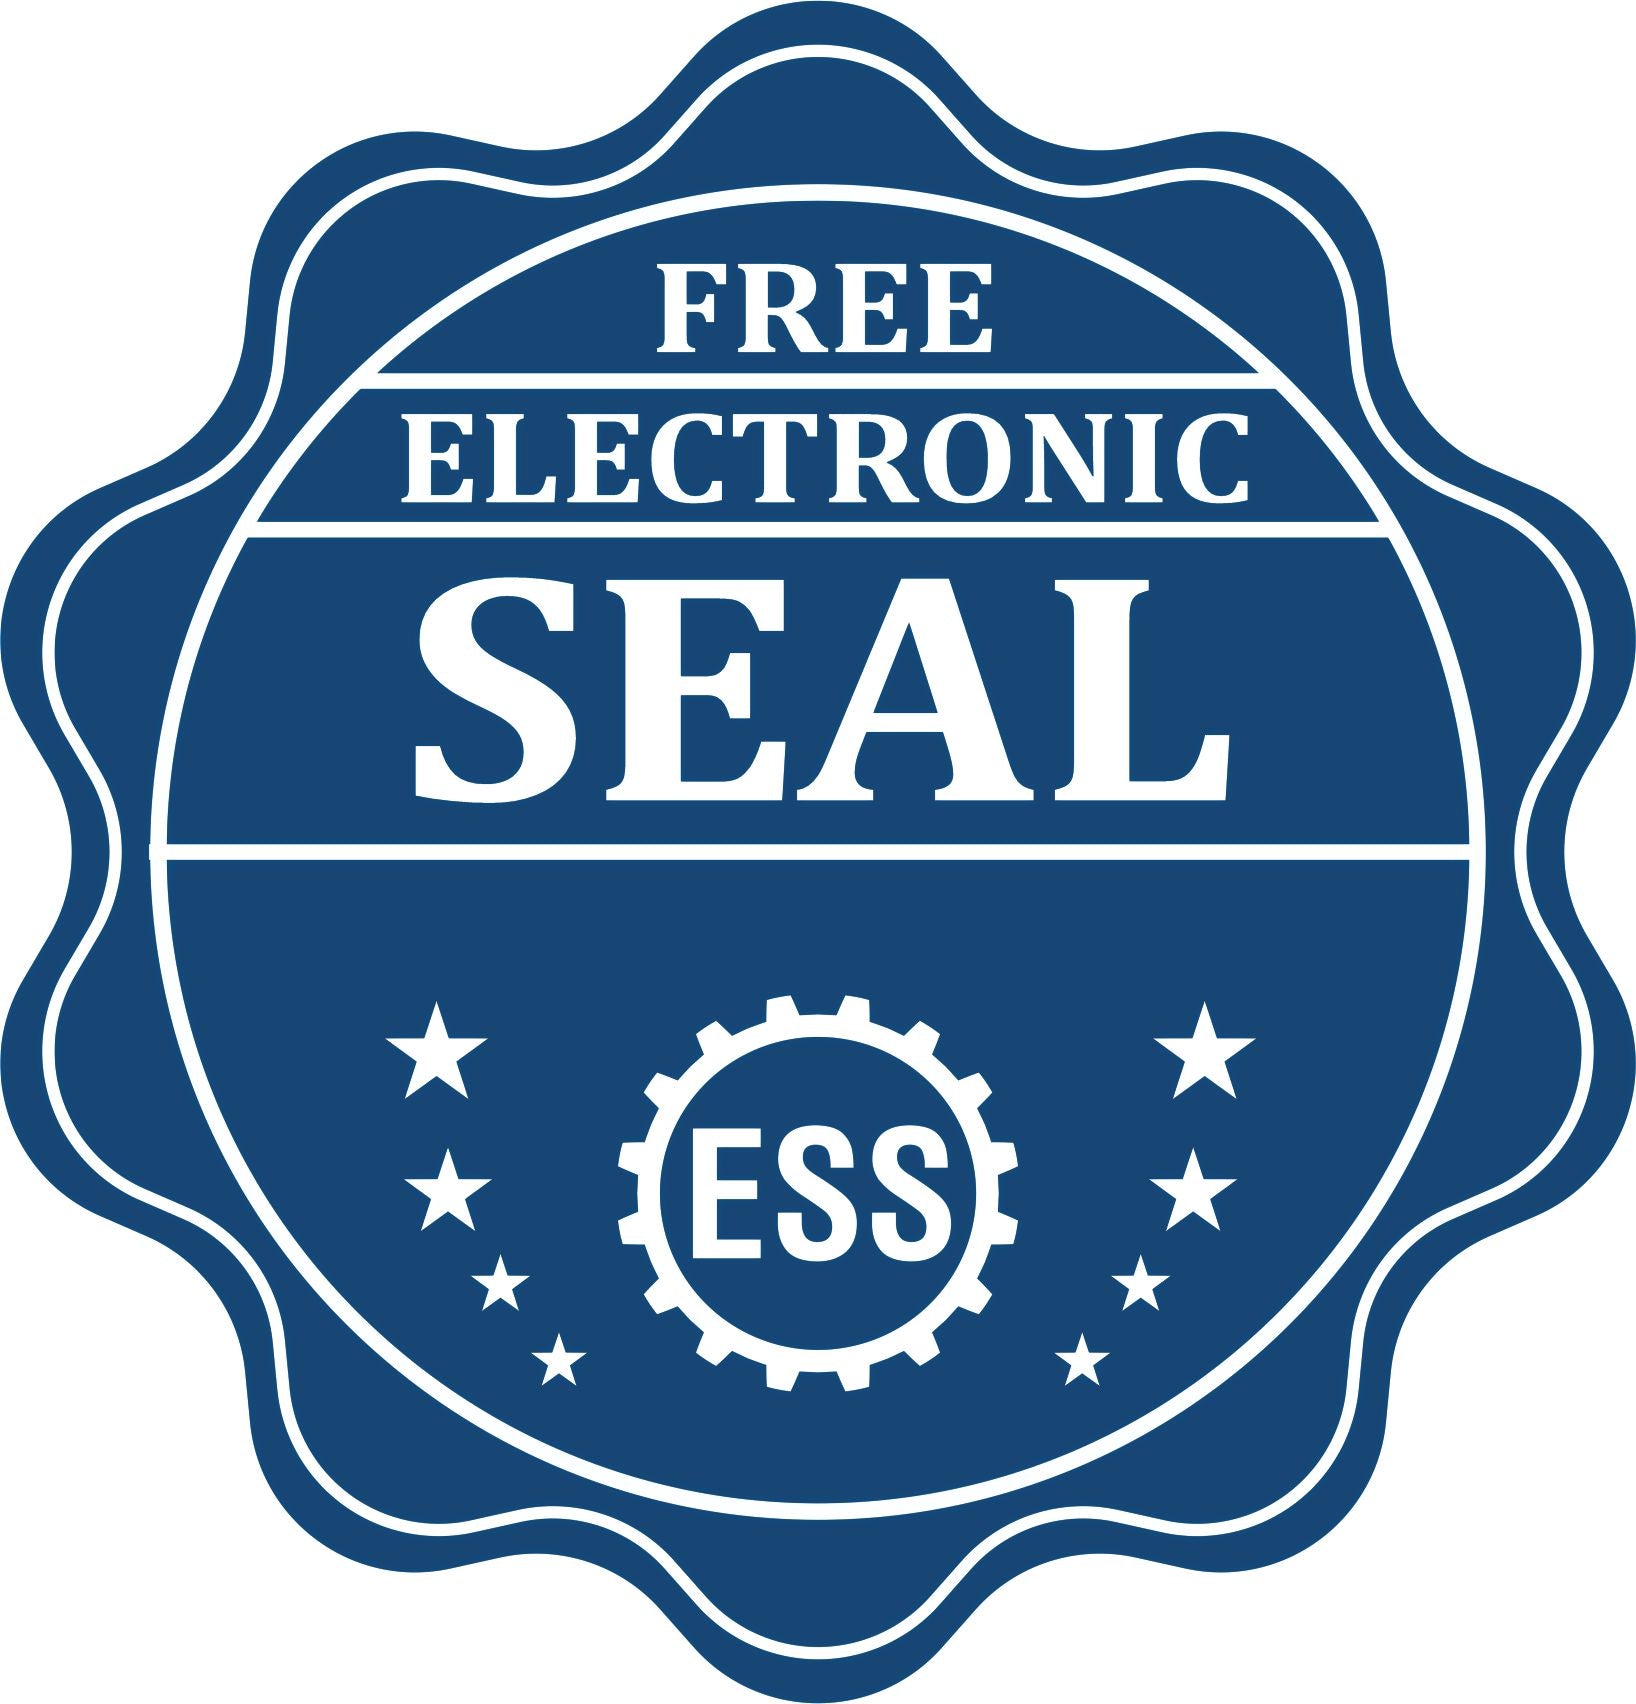 A badge showing a free electronic seal for the Heavy Duty Cast Iron Wisconsin Geologist Seal Embosser with stars and the ESS gear on the emblem.